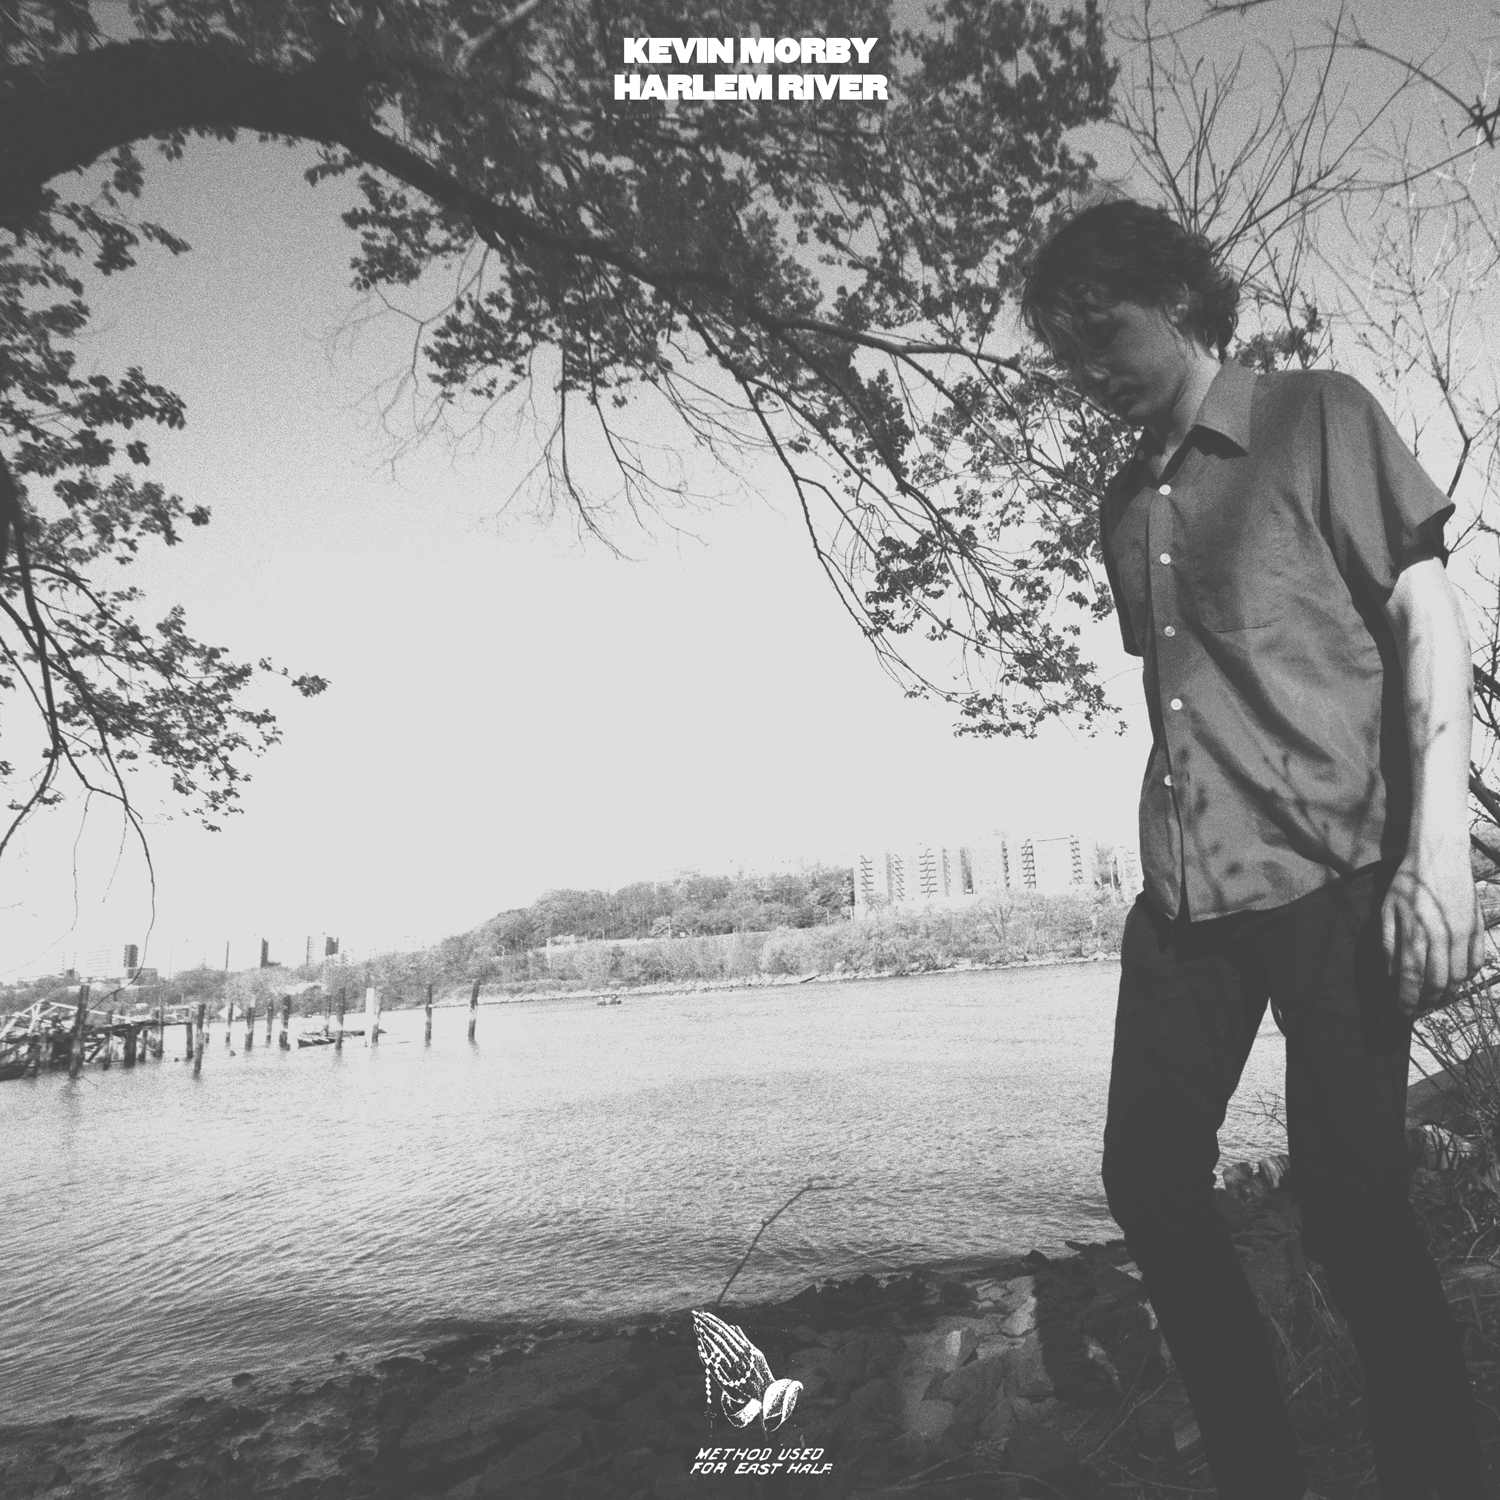 Kevin Morby announces debut solo LP, hear a song from it now